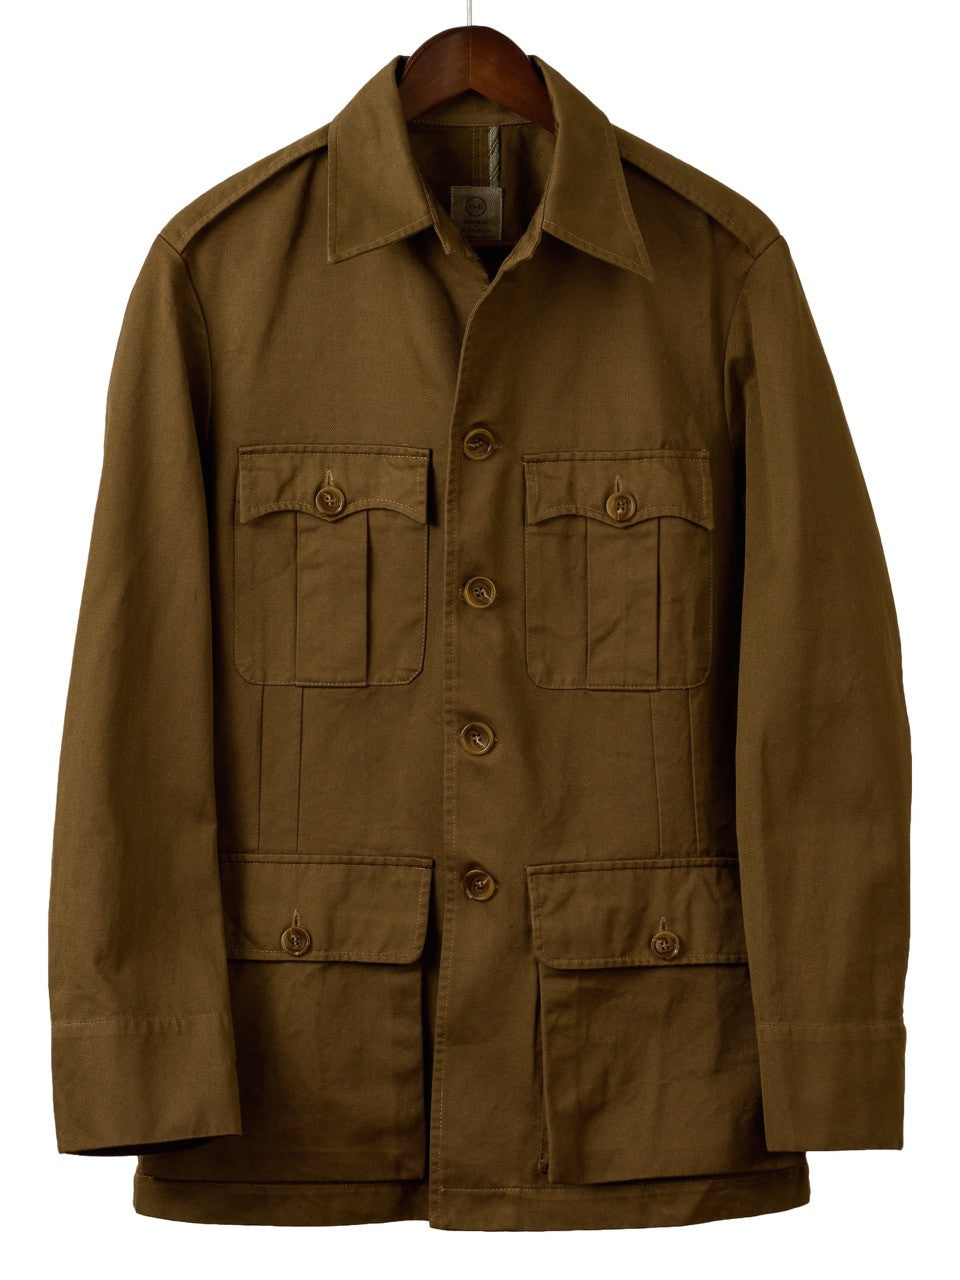 CLASSIC TAILORED SAFARI JACKET in Drab Drill, Jacket, Hickman & Bousfield - Hickman & Bousfield, Safari and Travel Clothing